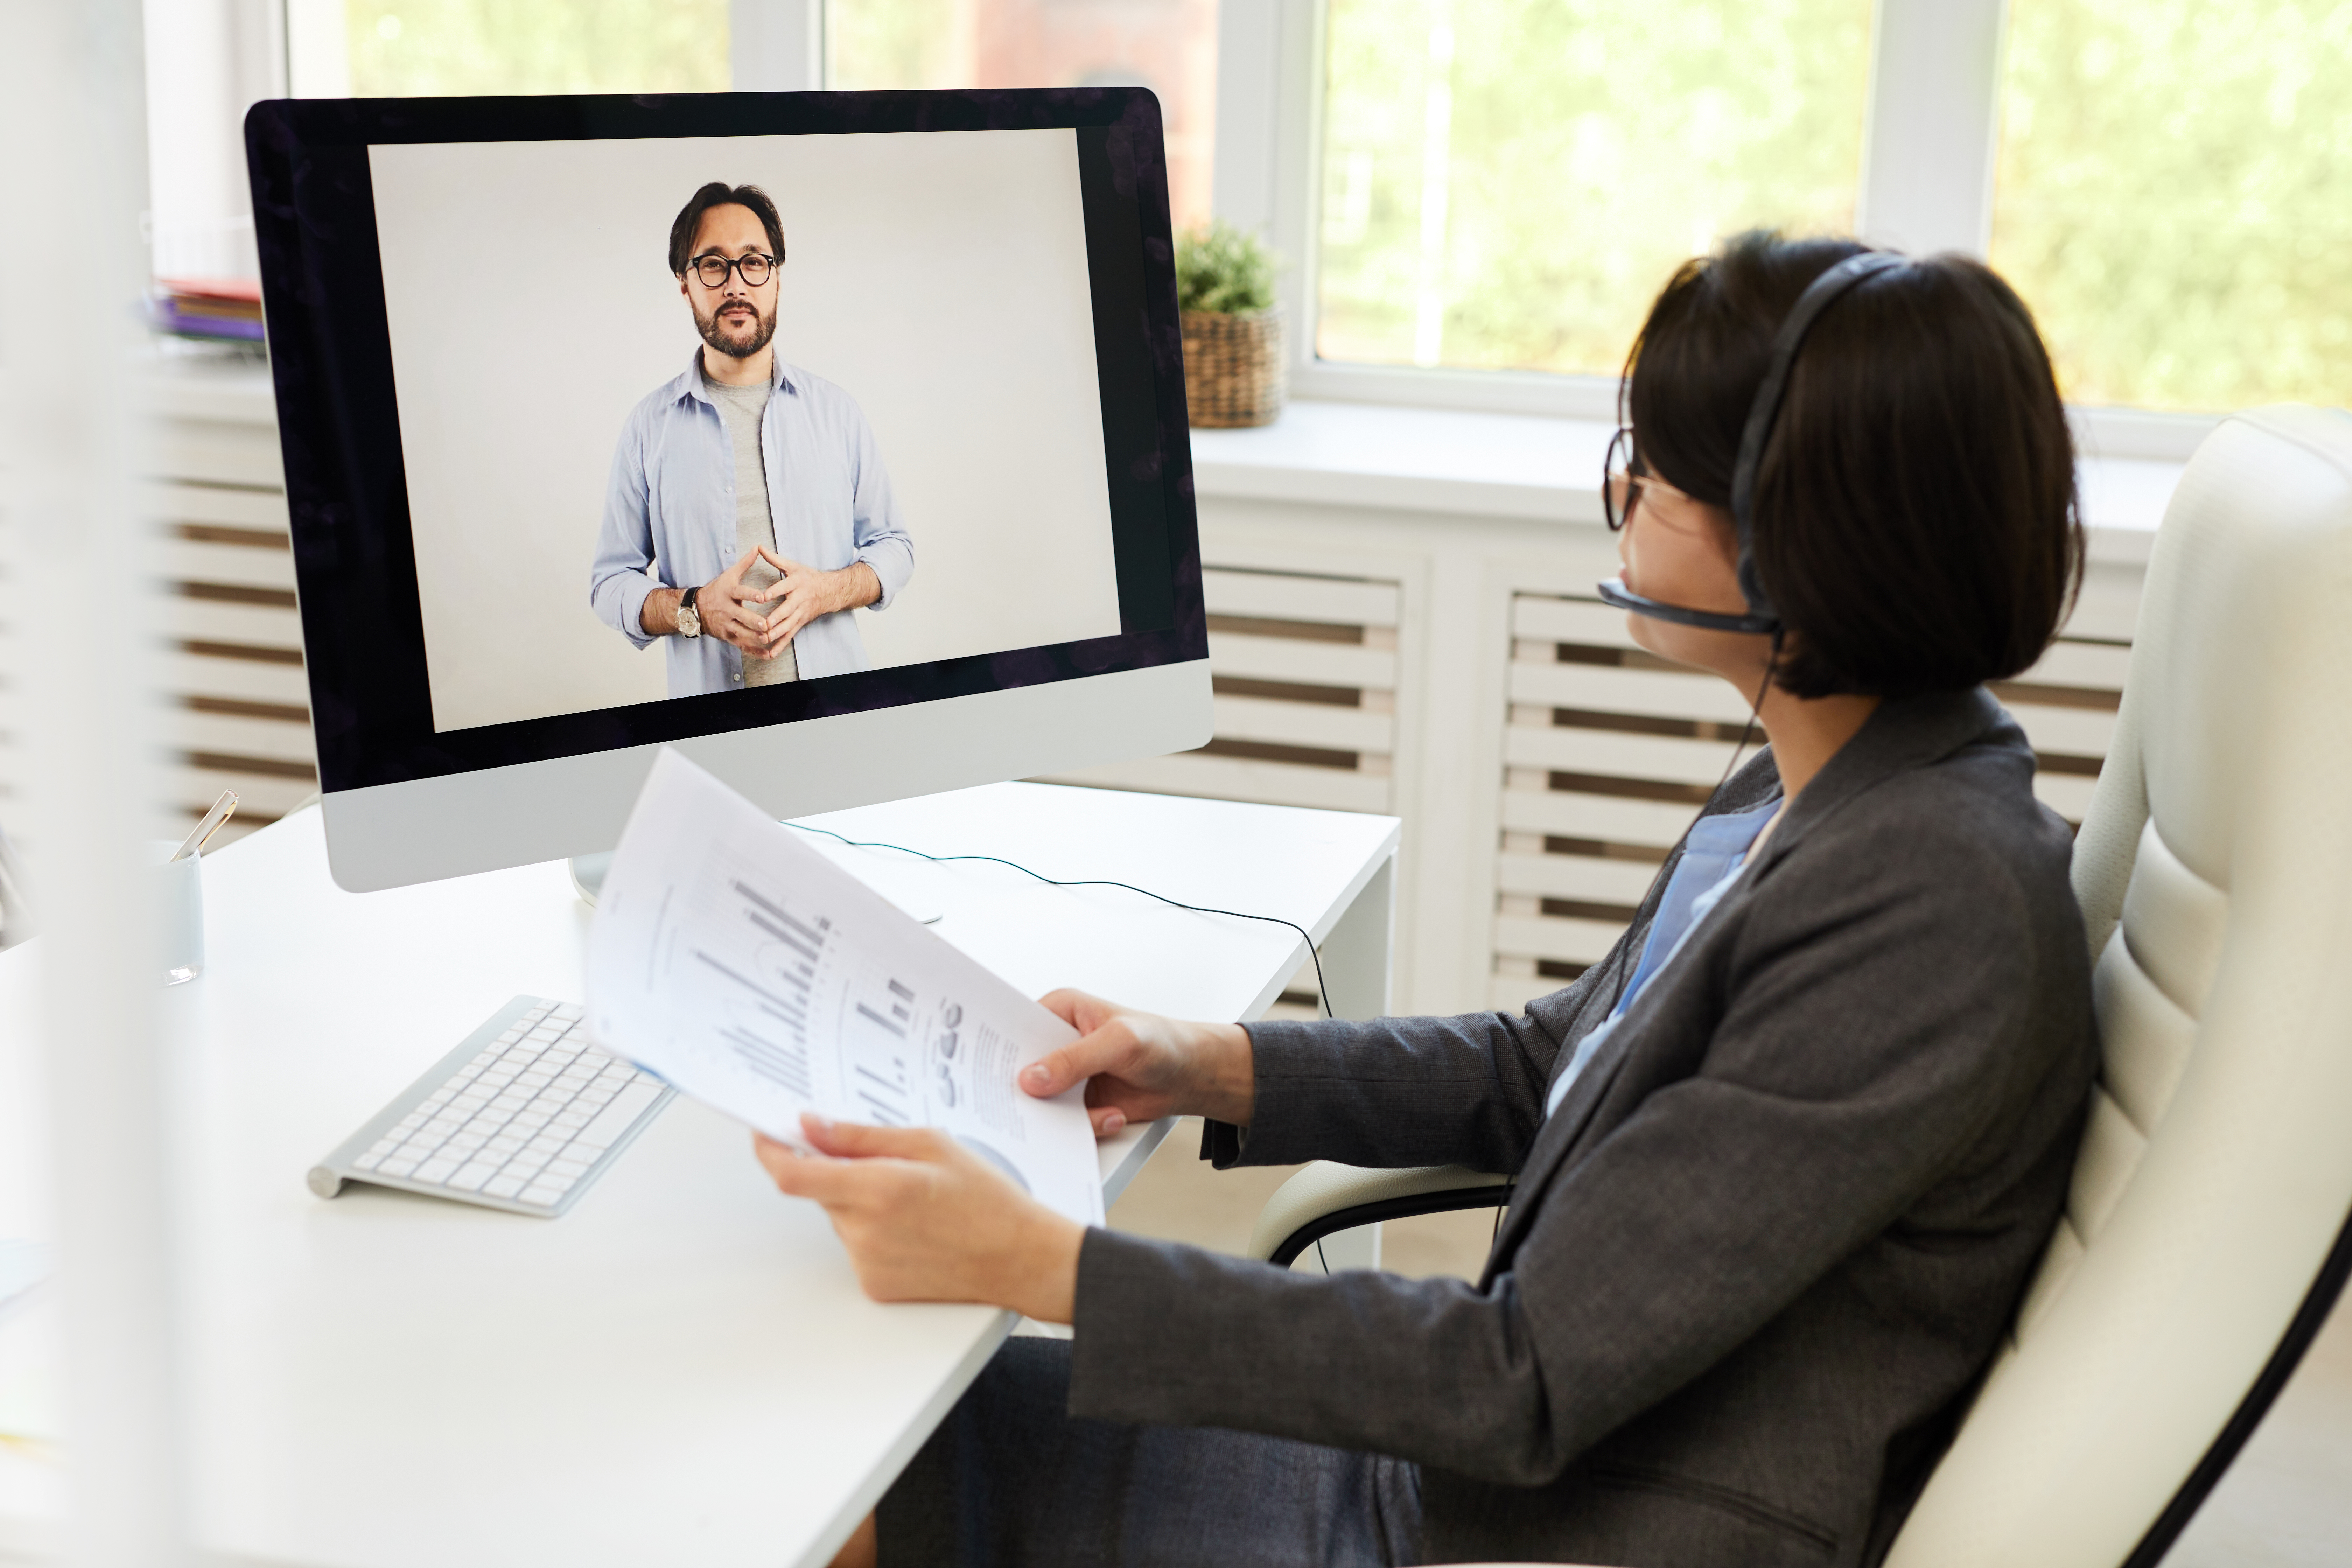 The 6 Must-Have Features of Web Conferencing Software